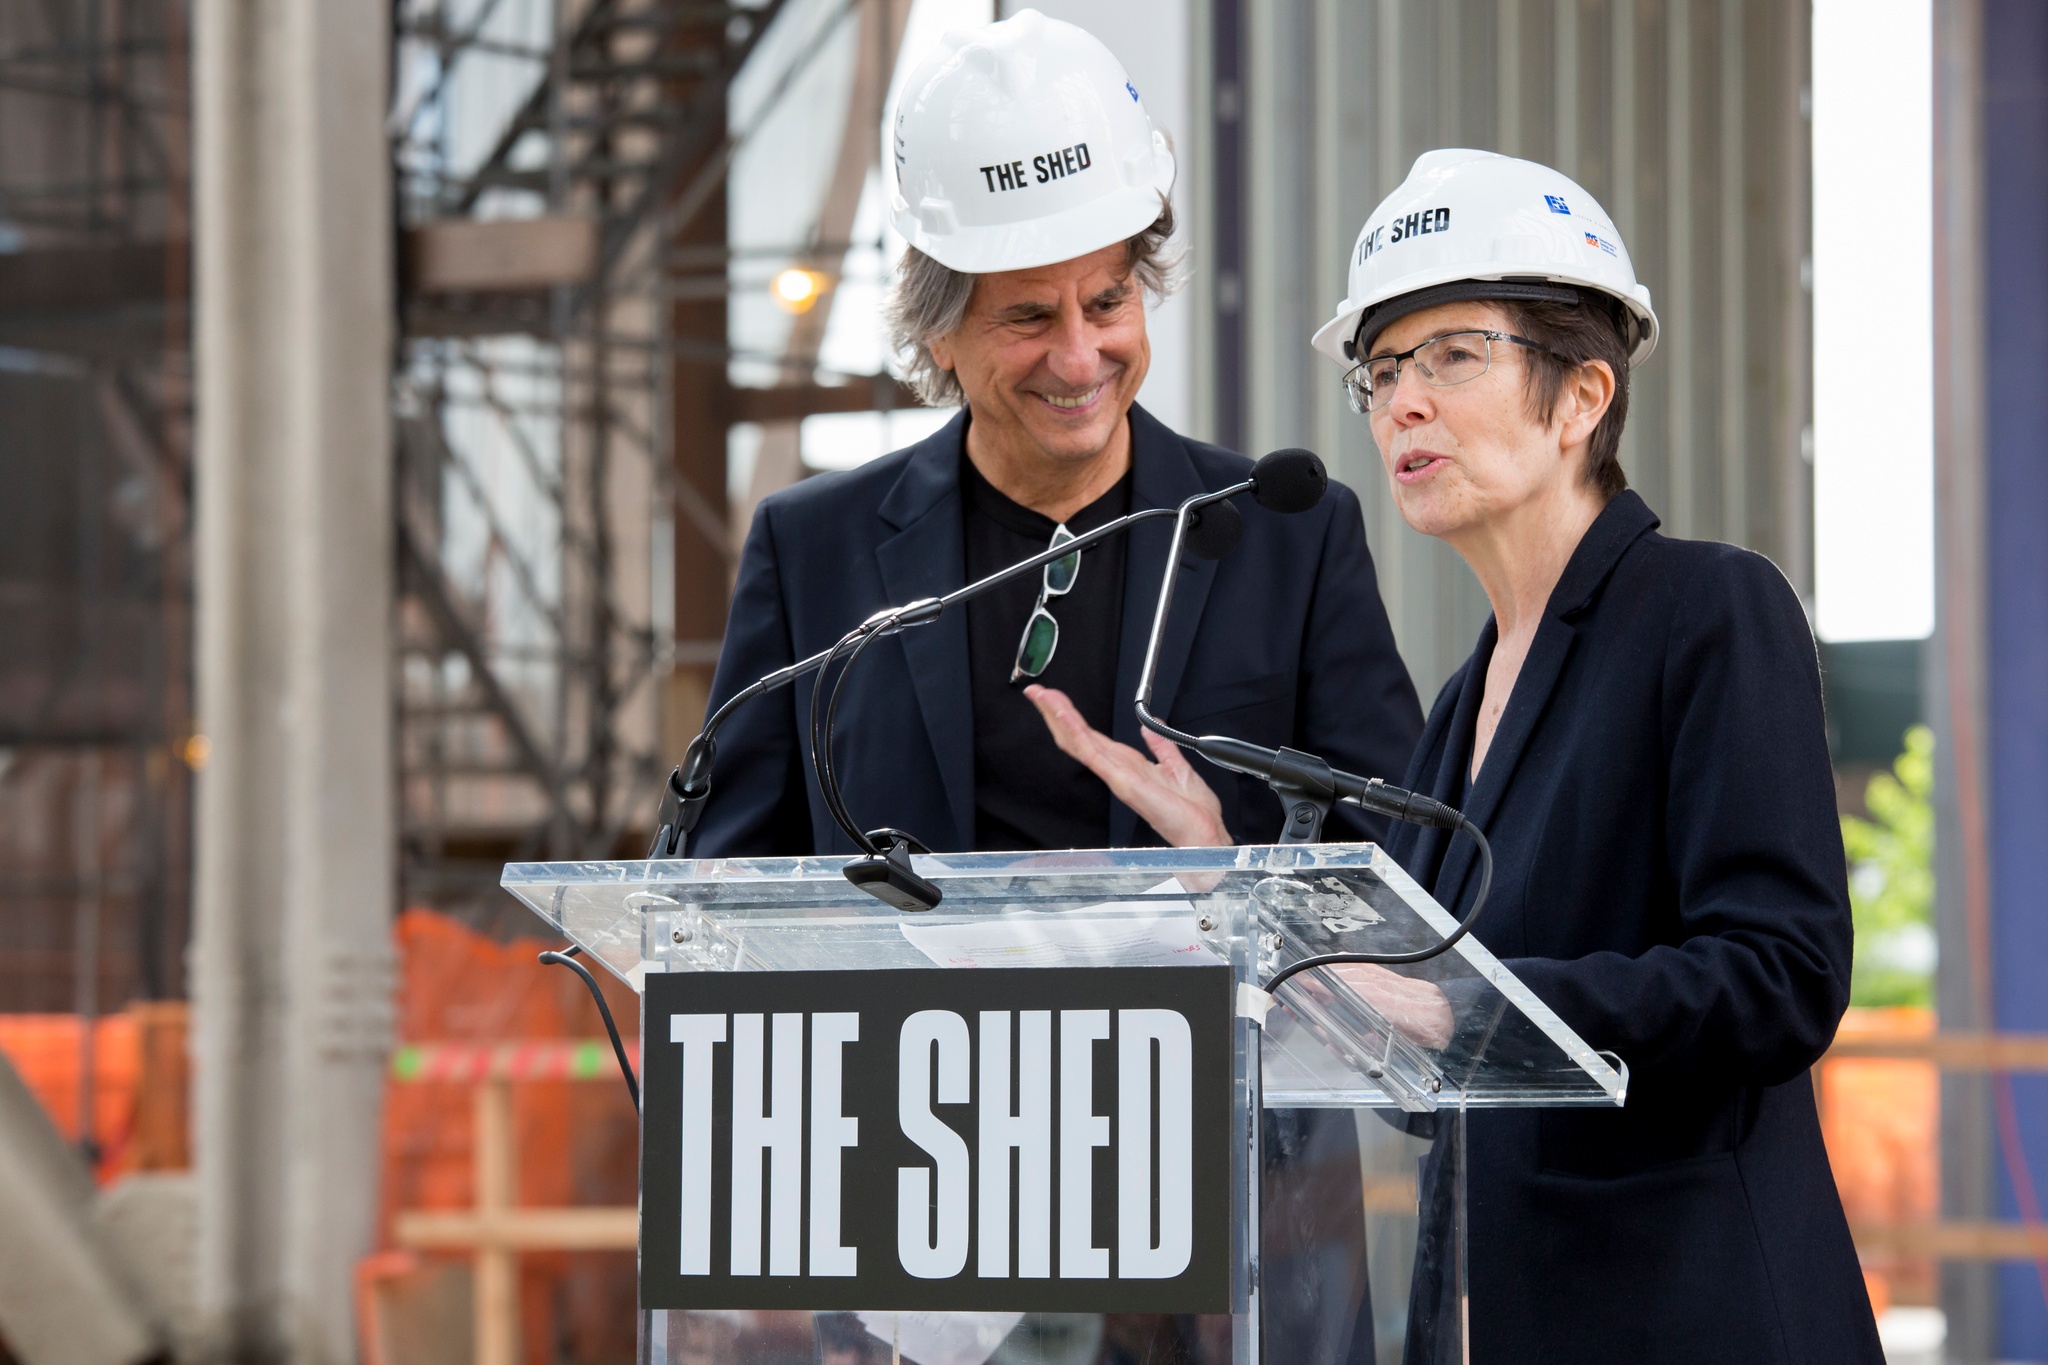 David Rockwell, of Rockwell Group, Collaborating Architect, and Liz Diller, of Diller Scofidio + Renfro, Lead Architect, at The Shed's First Reveal in May 2017.